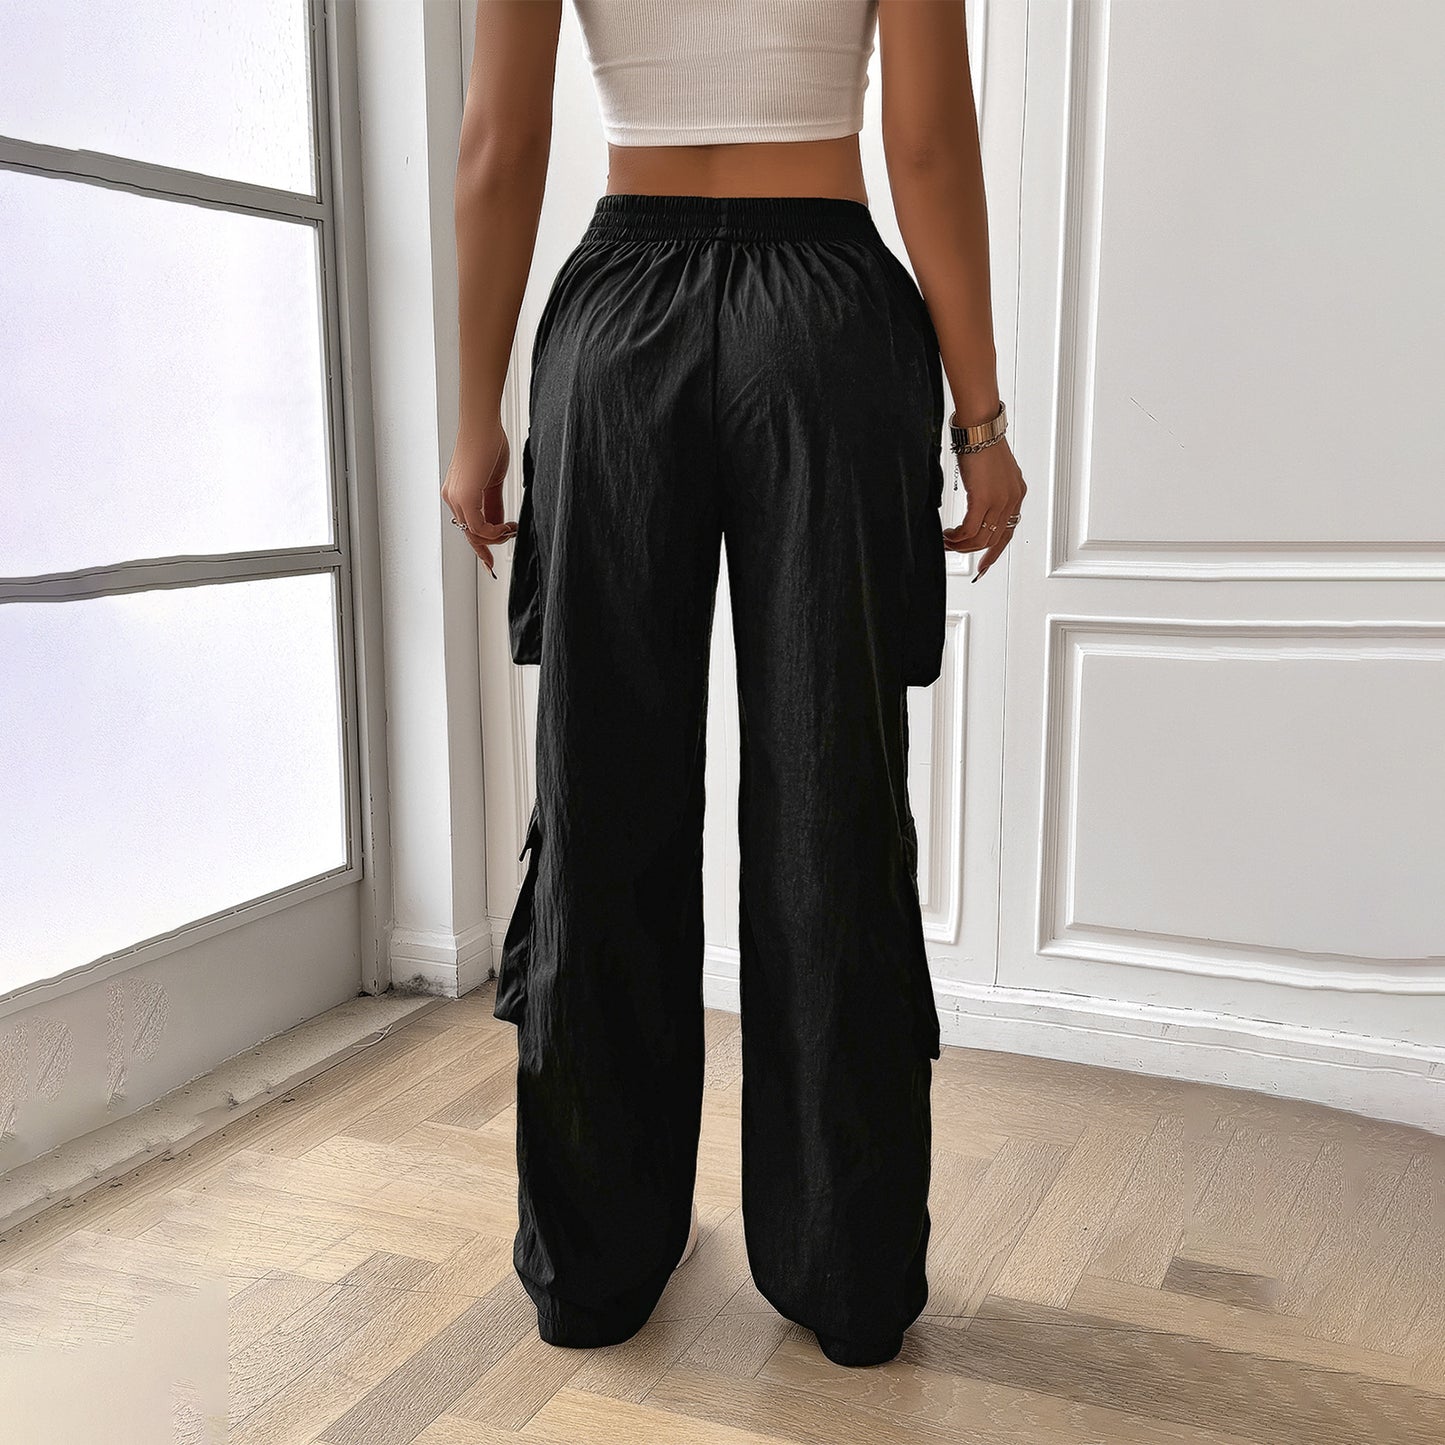 Women's Casual Solid Color Sweatpants: Fashionable Trousers